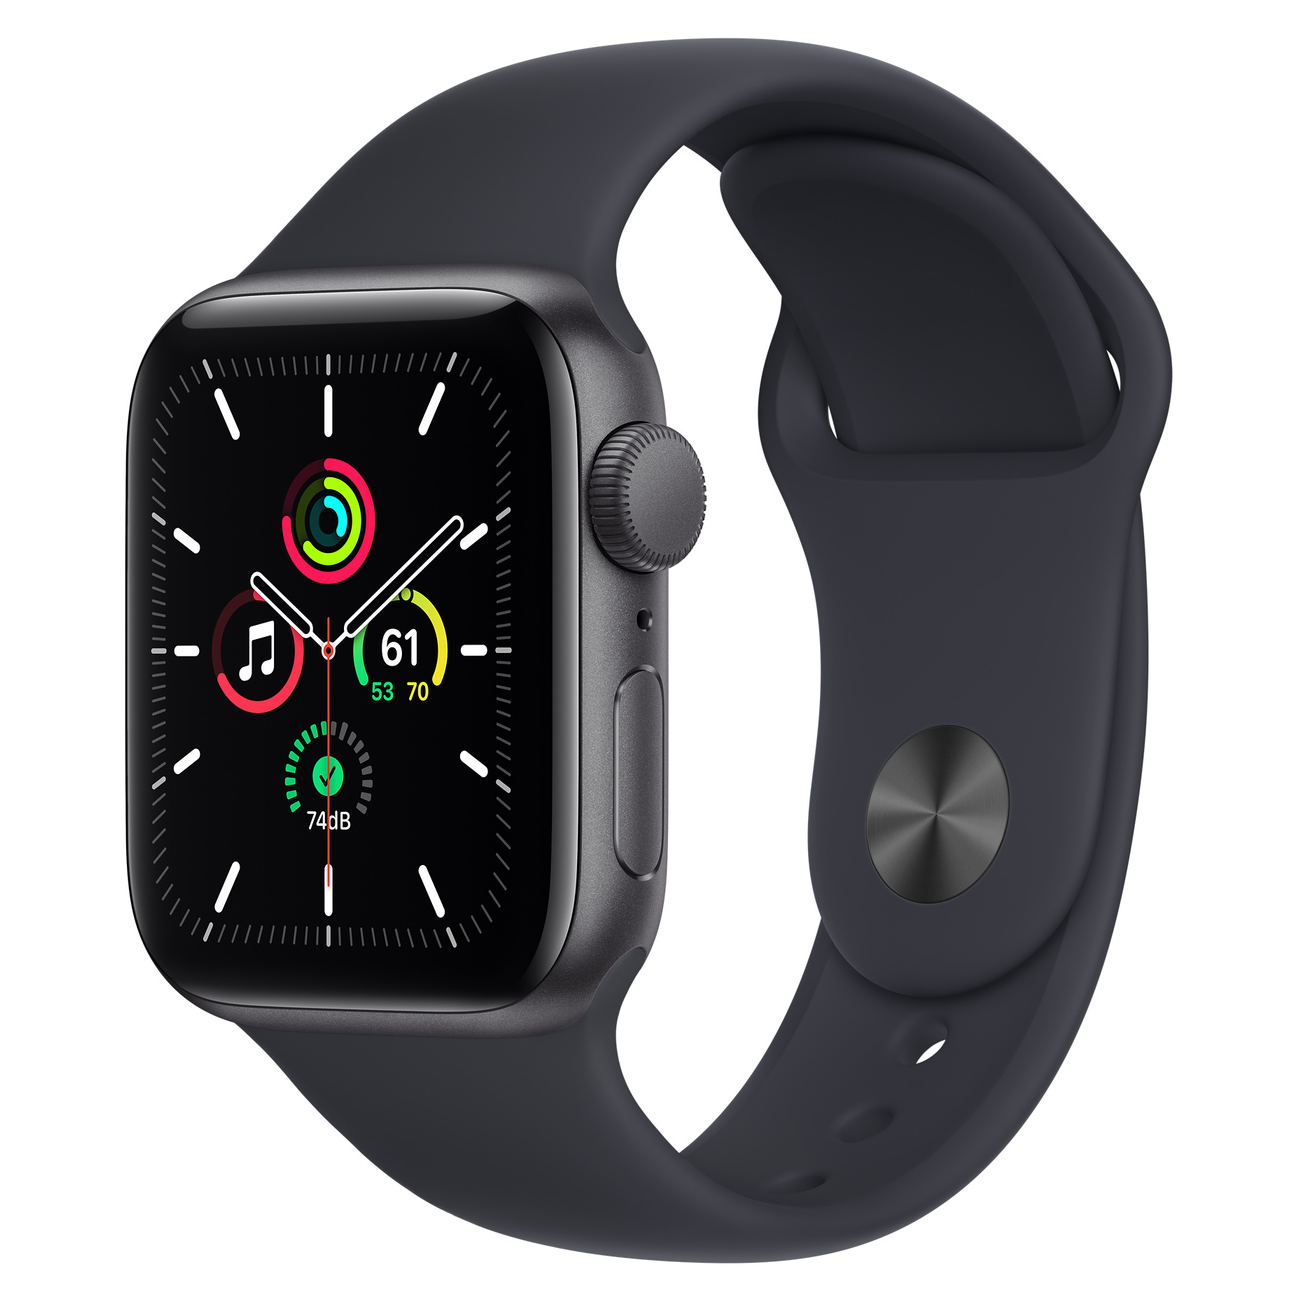 Apple Watch SE (1st Gen) GPS, 40mm Space Gray Aluminum Case with Midnight Sport Band - Regular - image 2 of 9